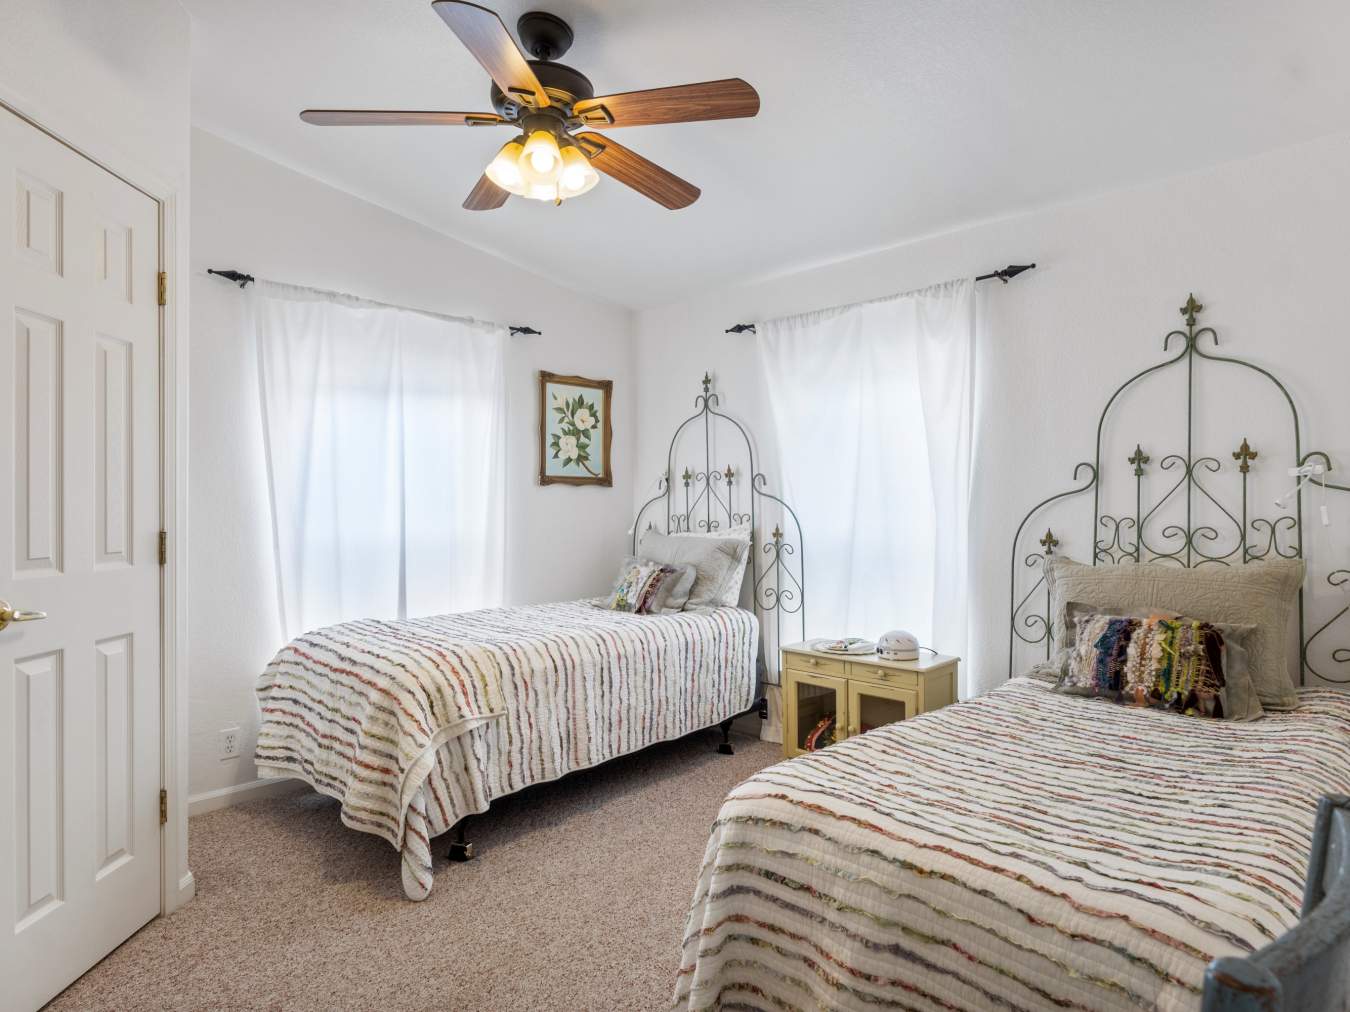 Light and airy bedroom with two twin beds, each with a colorful striped quilt and pale green iron trellis headboard. The room has two windows with white drapes and a ceiling fan.